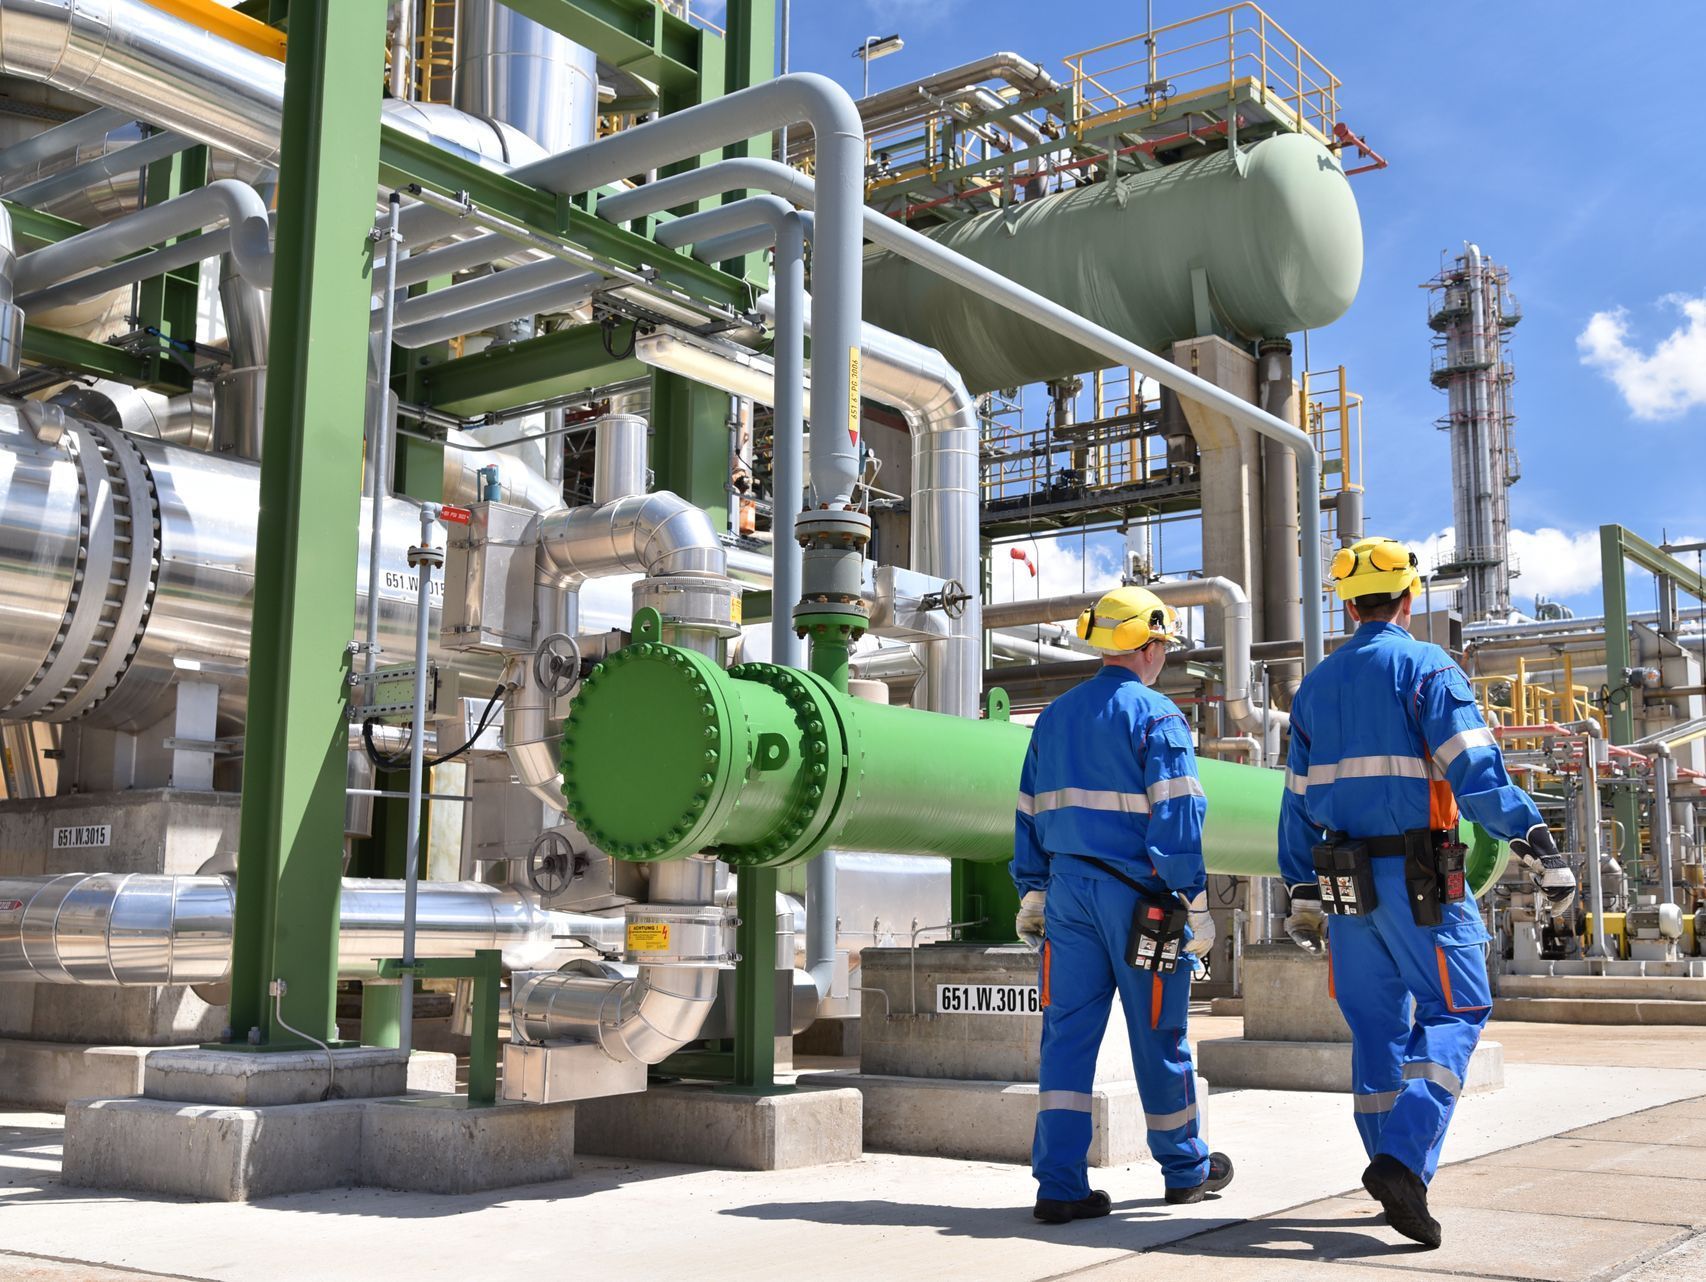 chemical insdustry plant workers walking around a refinery producing green solvents